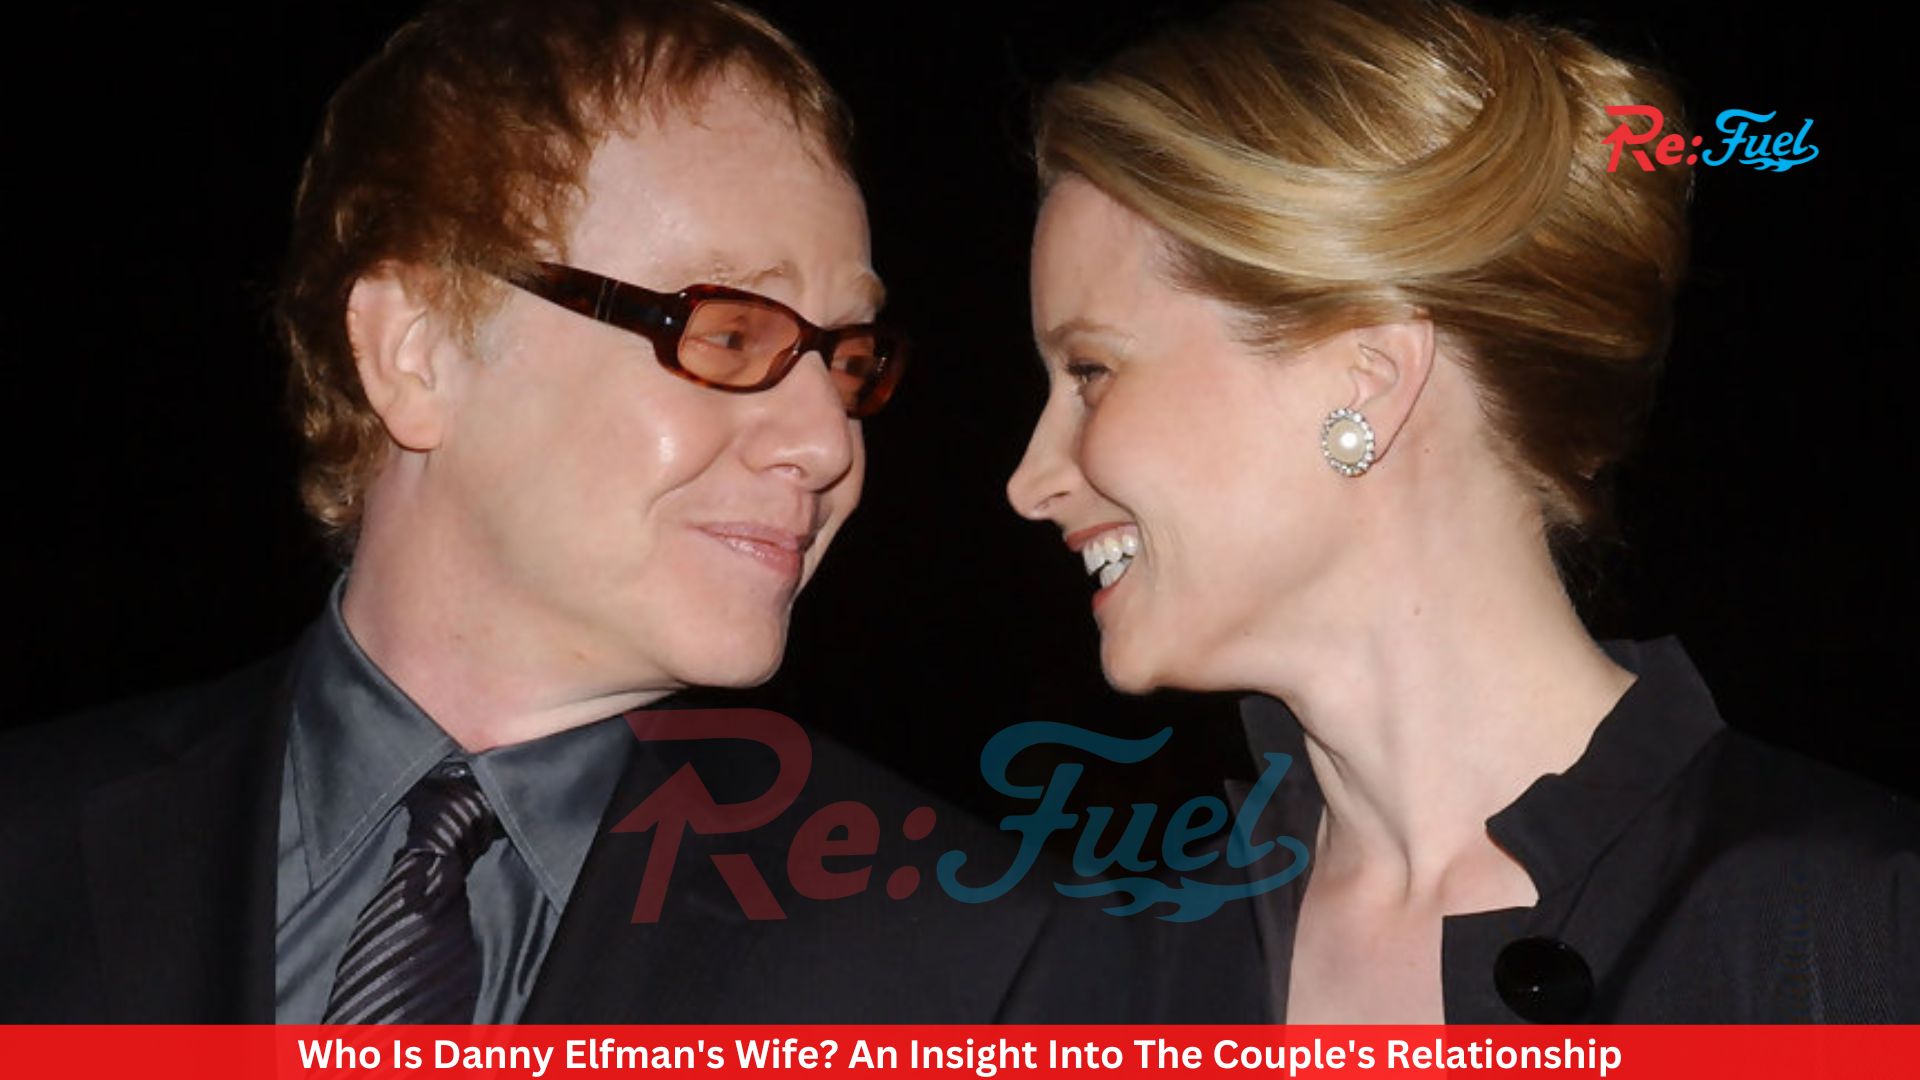 Who Is Danny Elfman's Wife? An Insight Into The Couple's Relationship